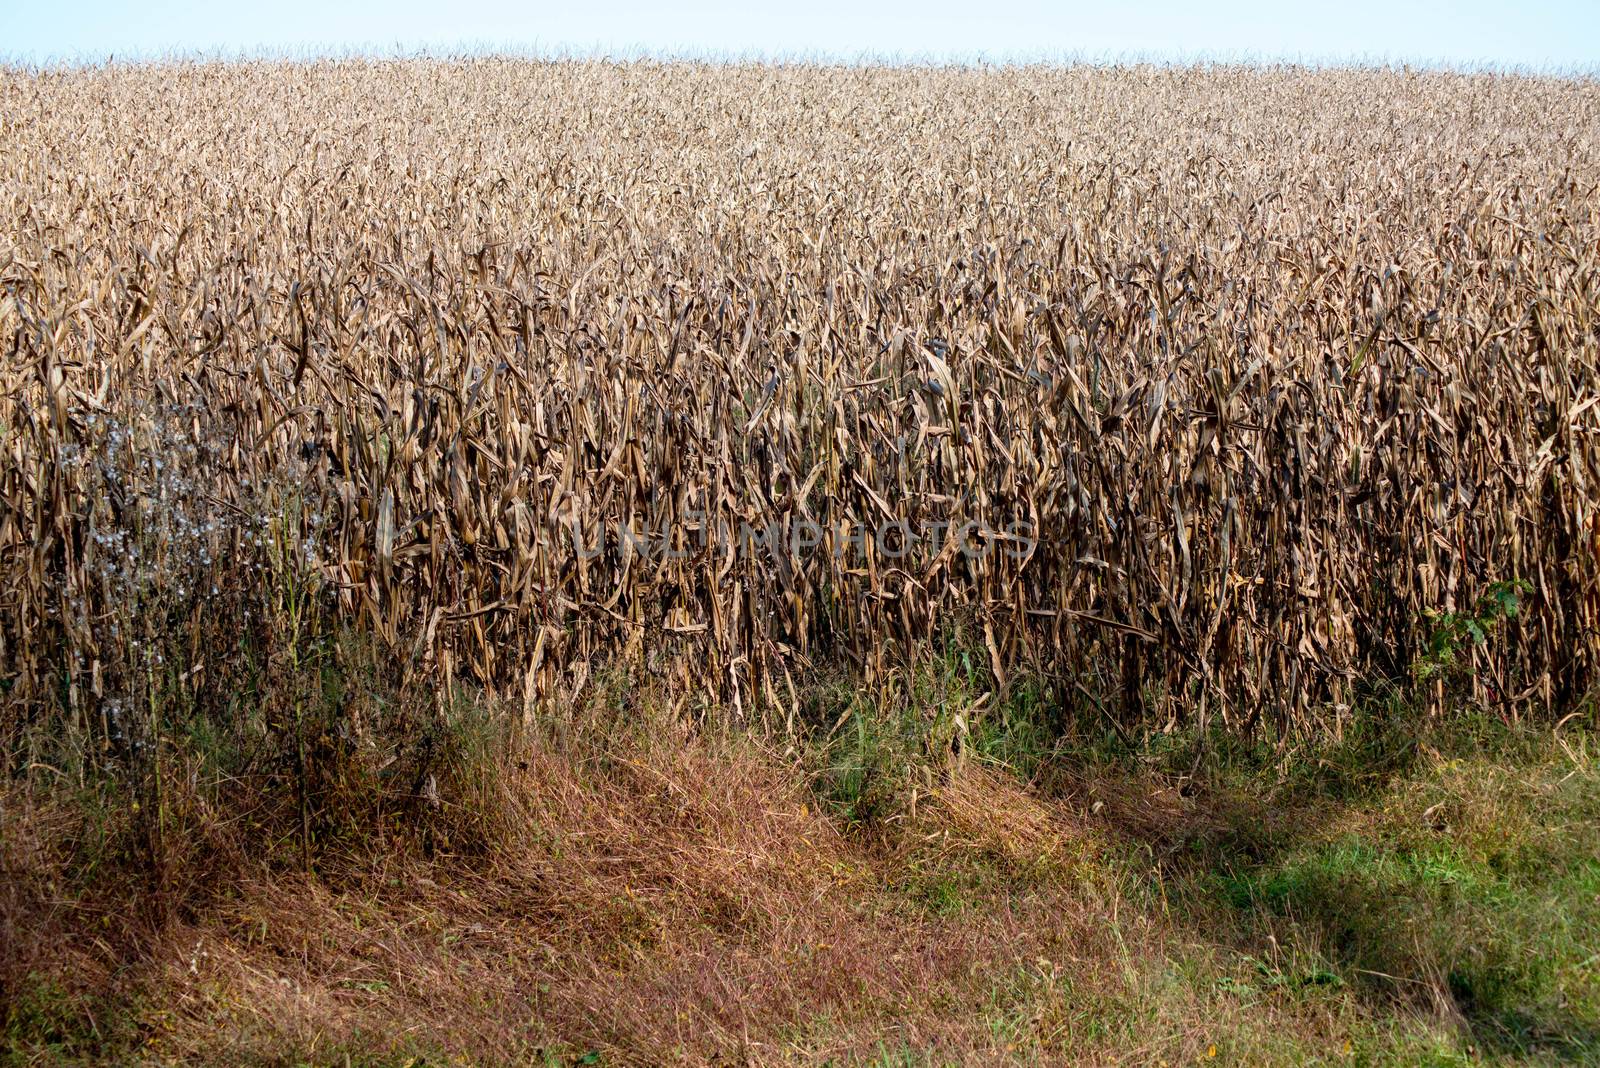 Full frame image of an agricultural corn field in natural sunlight. Stalks are tall, brown and ready for harvest, with copy space.